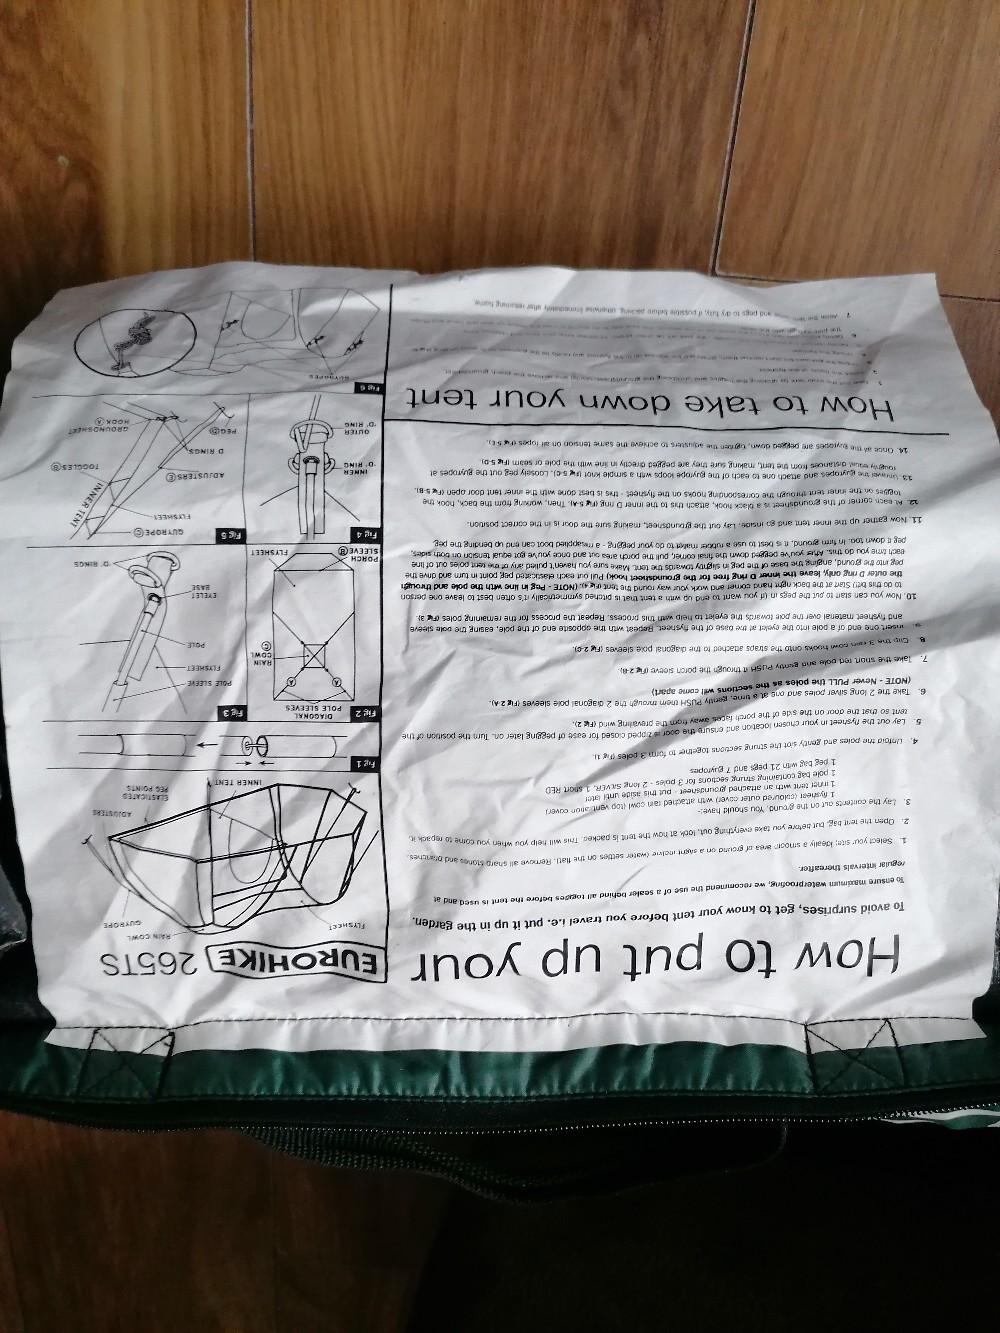 Eurohike 265TS 2 Person Tent in WV14 Wolverhampton for £25.00 for sale ...